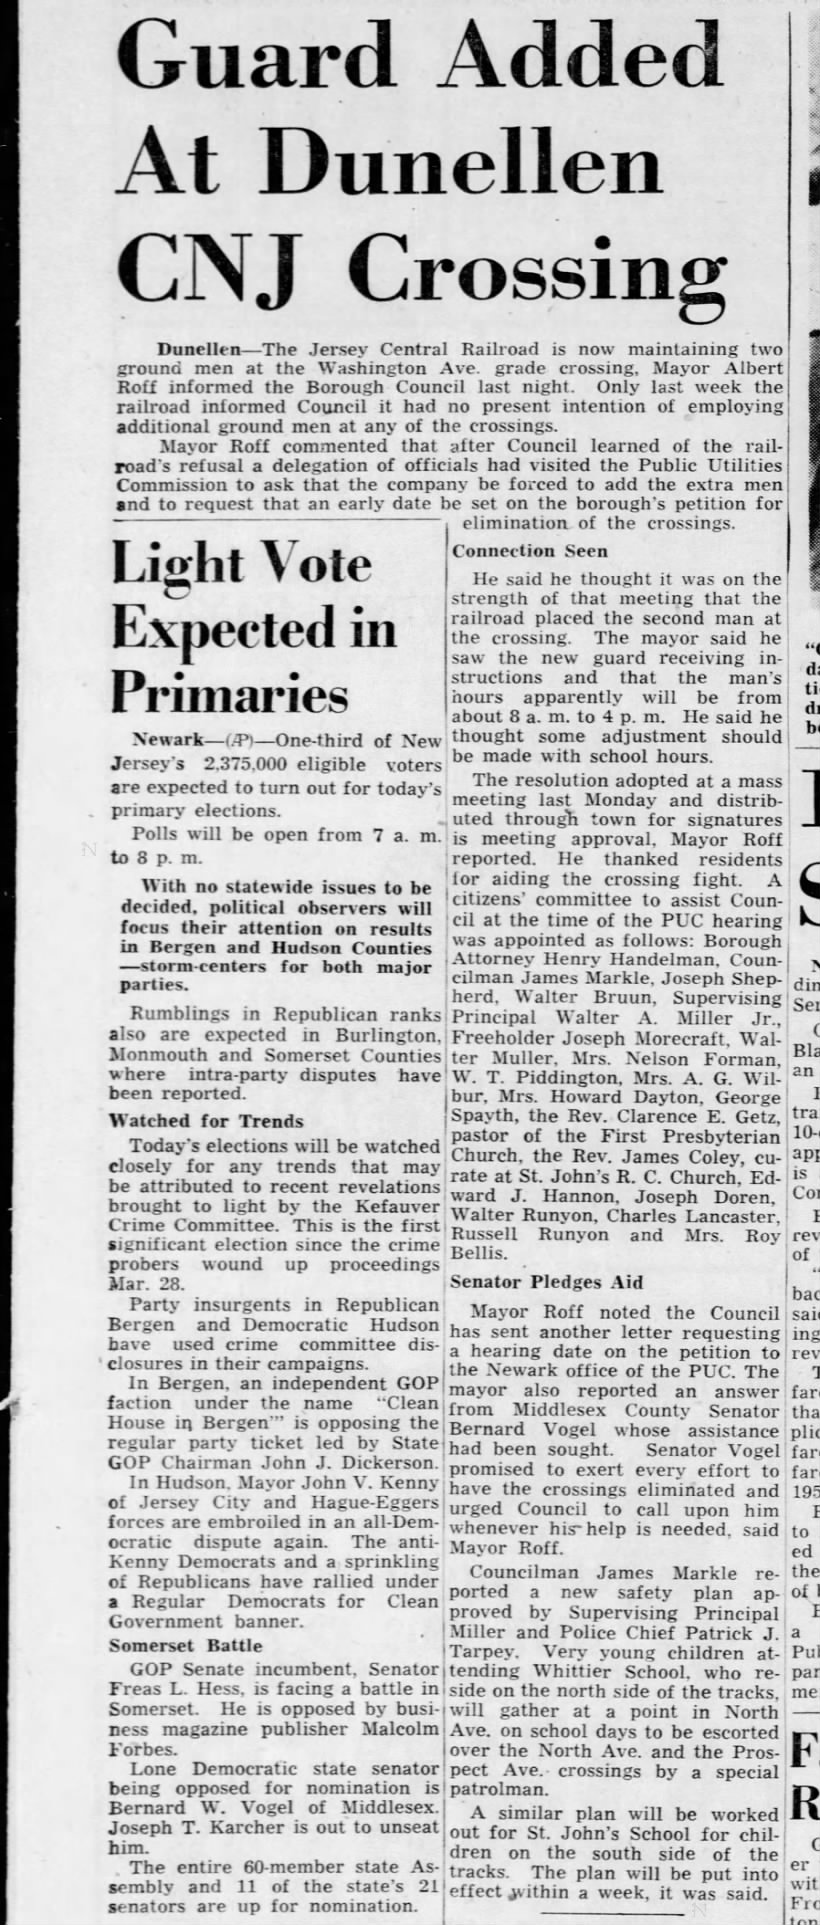 Guards added, April 17, 1951